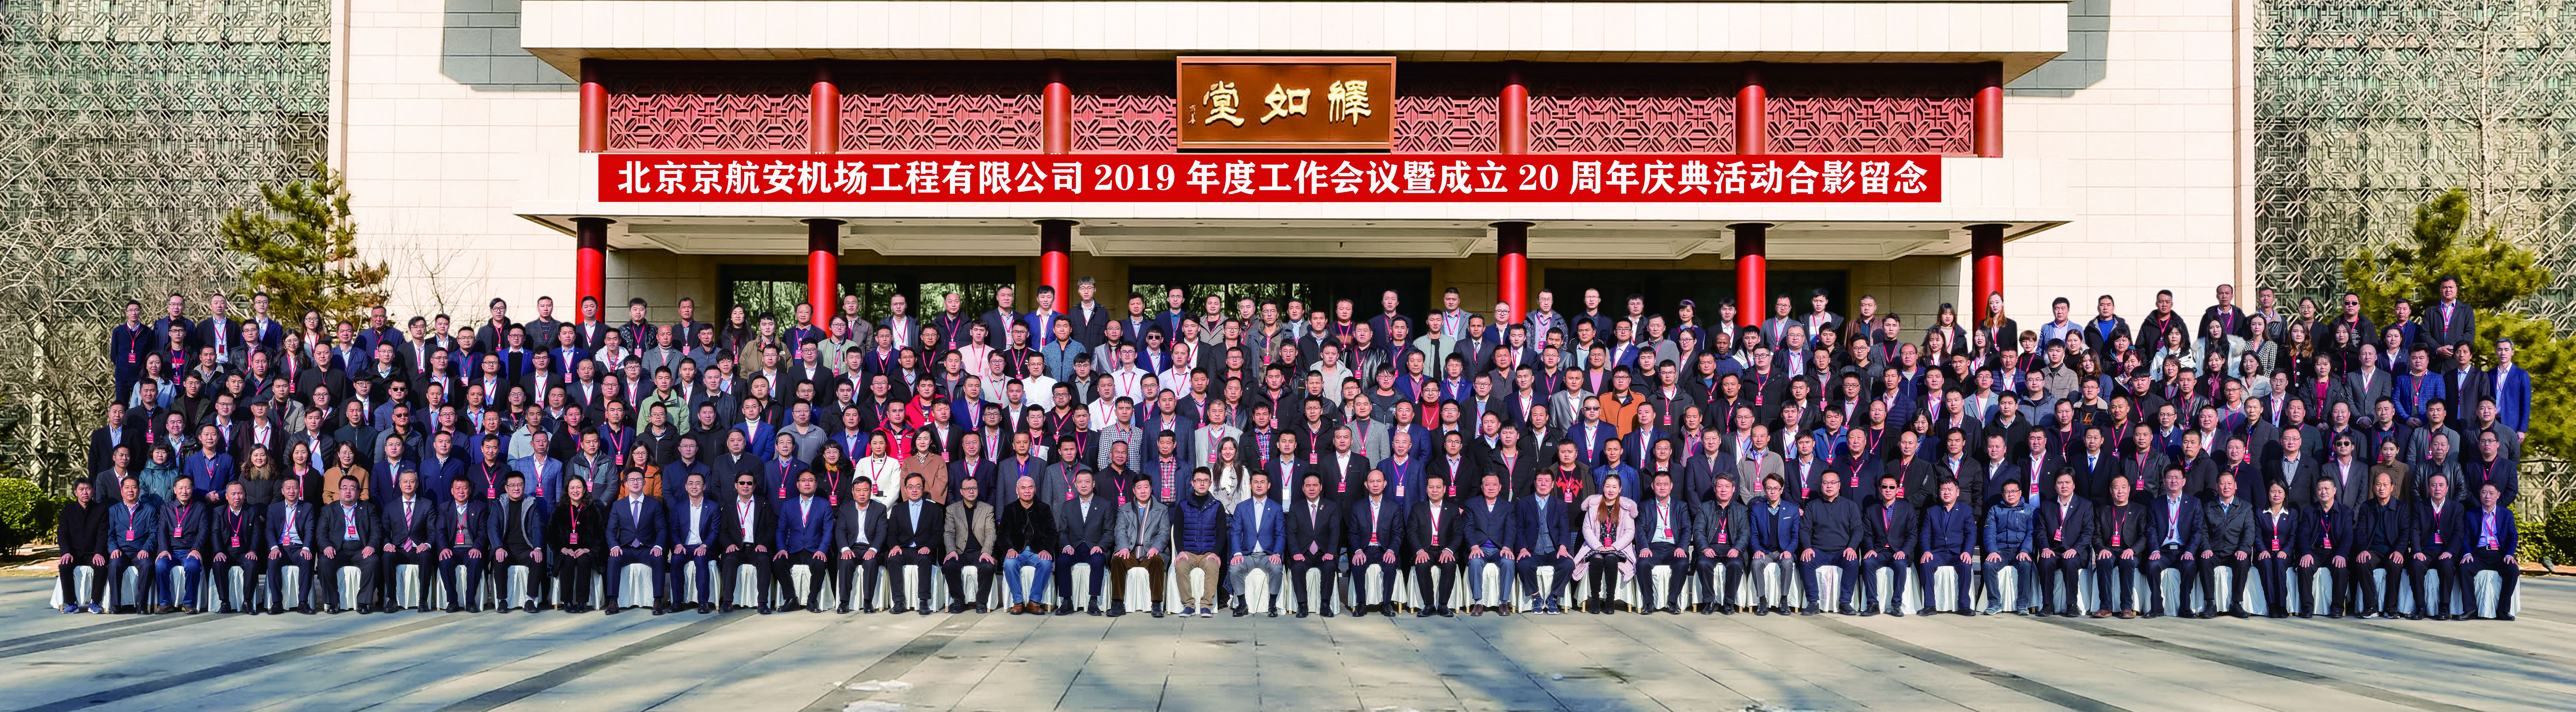 Group photo of 2020 annual meeting